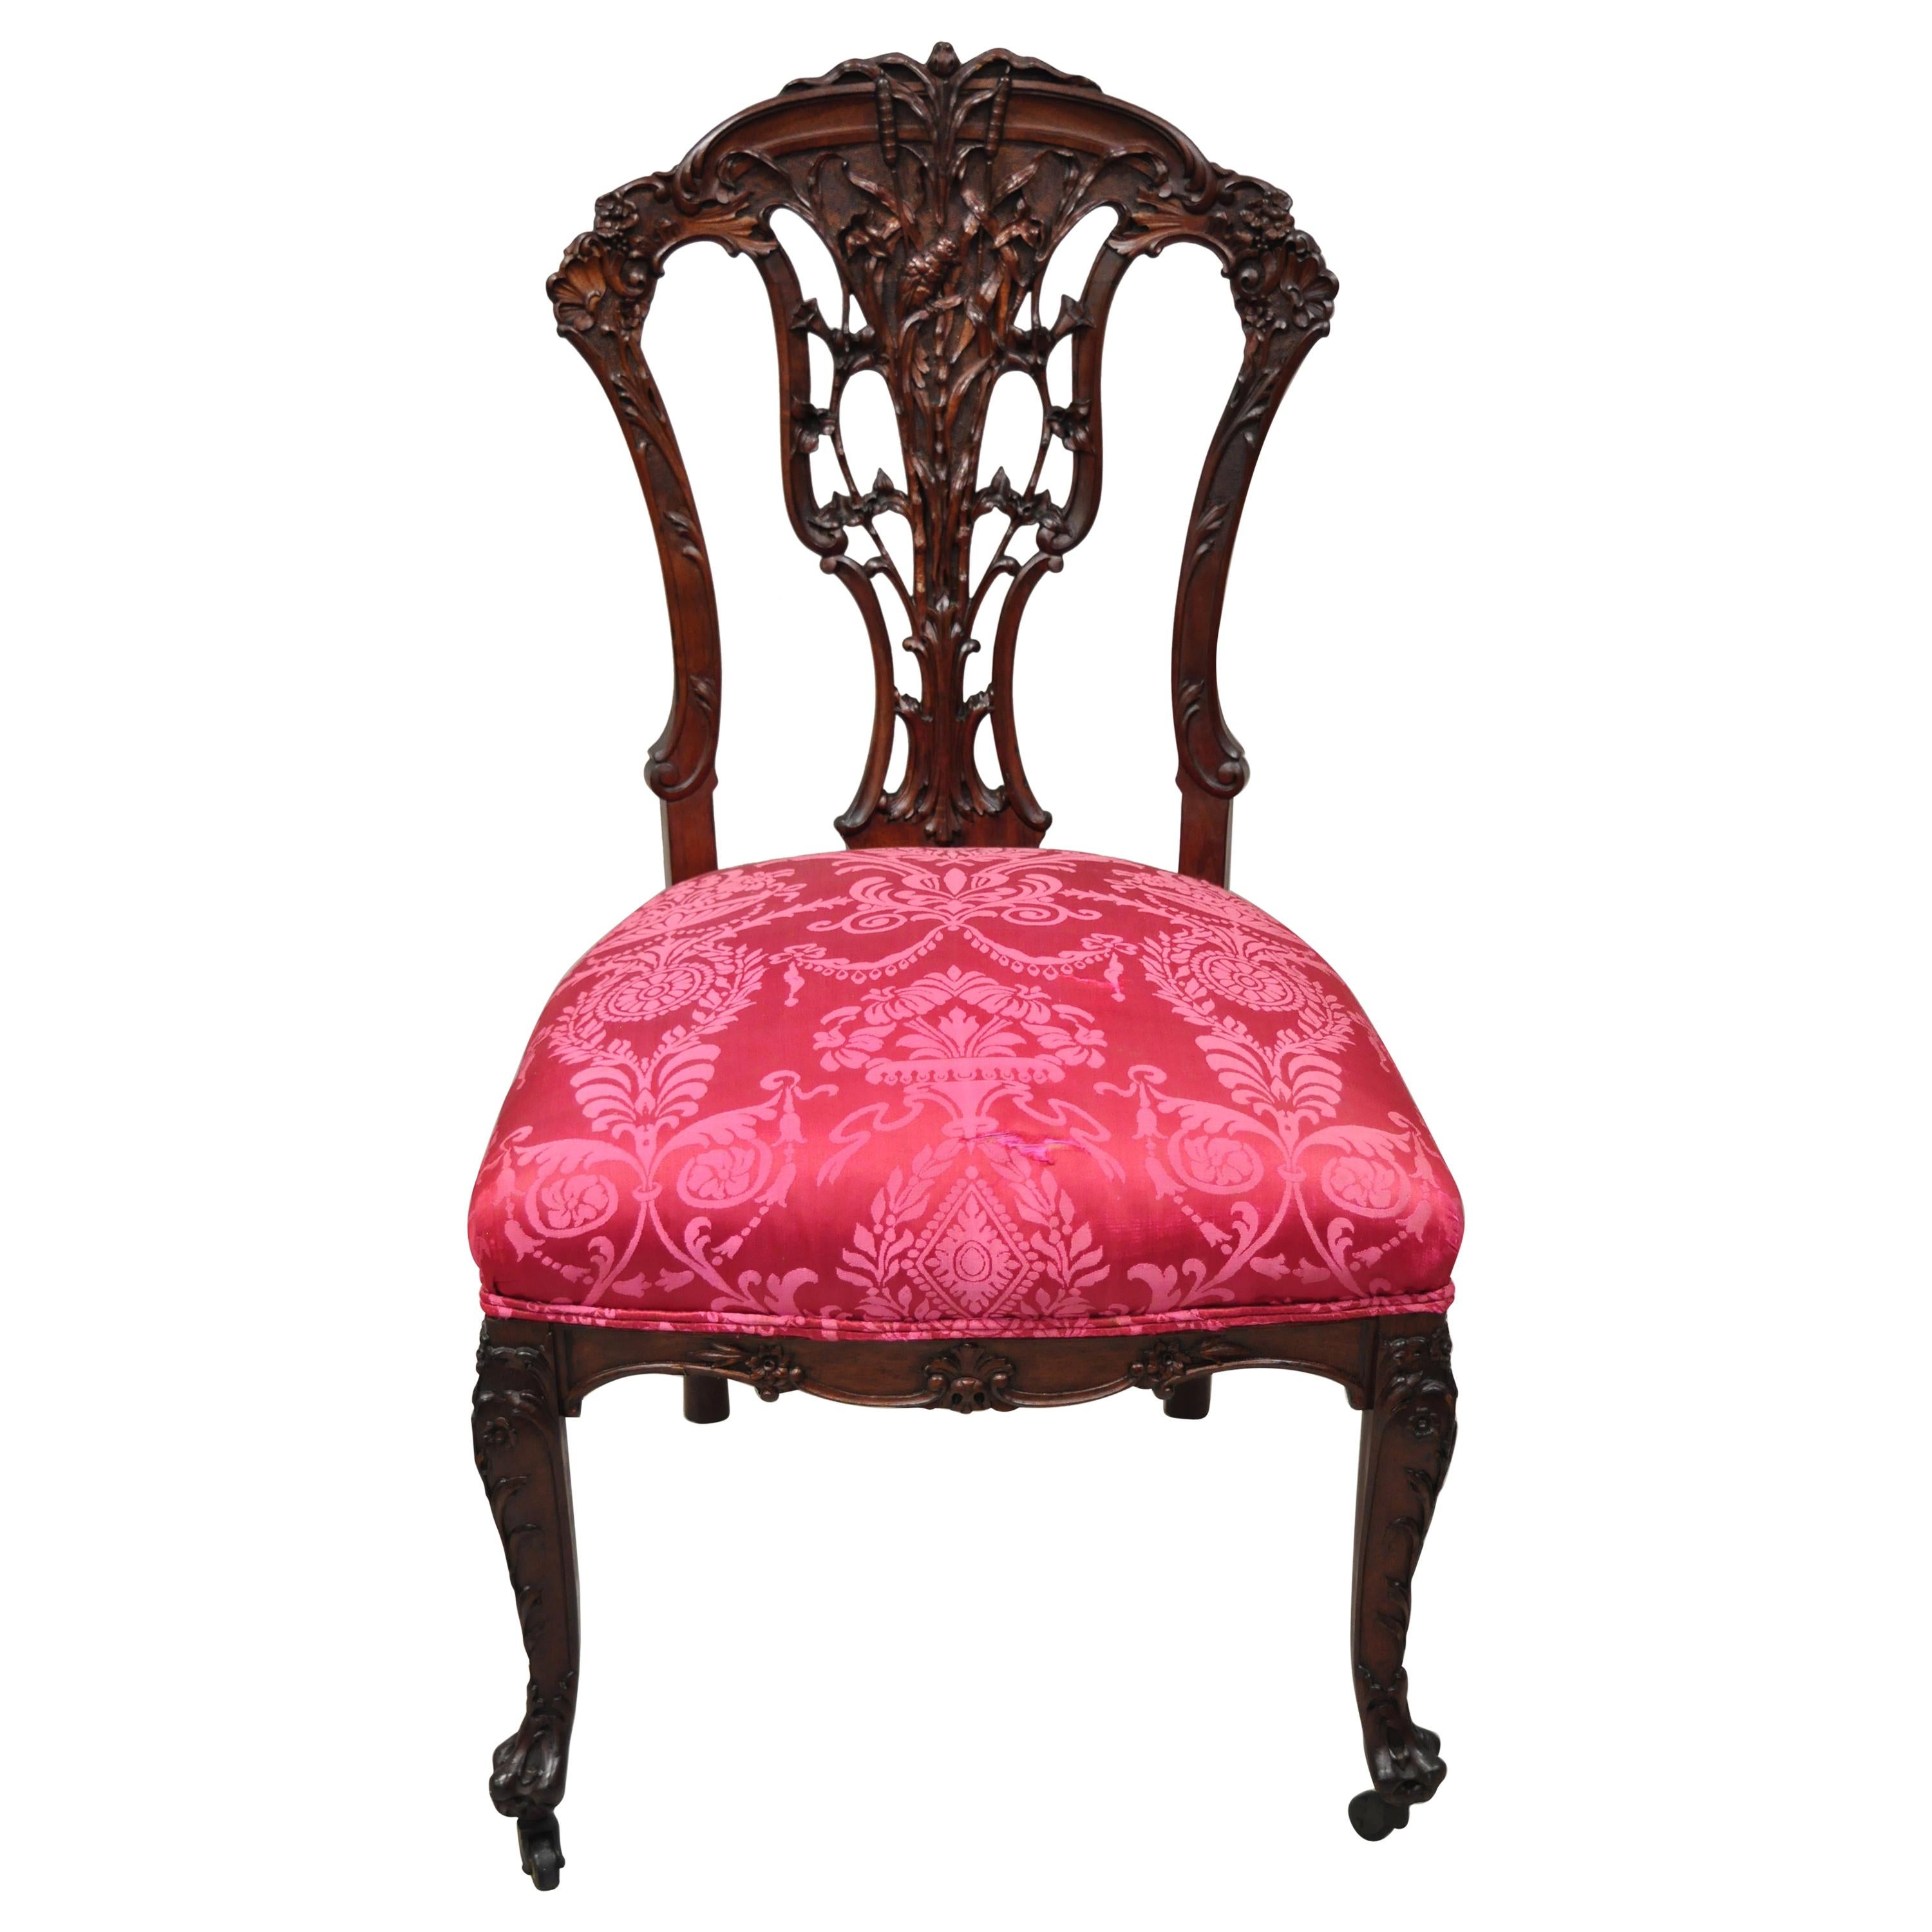 Antique French Art Nouveau Bird and Flower Carved Mahogany Accent Side Chair